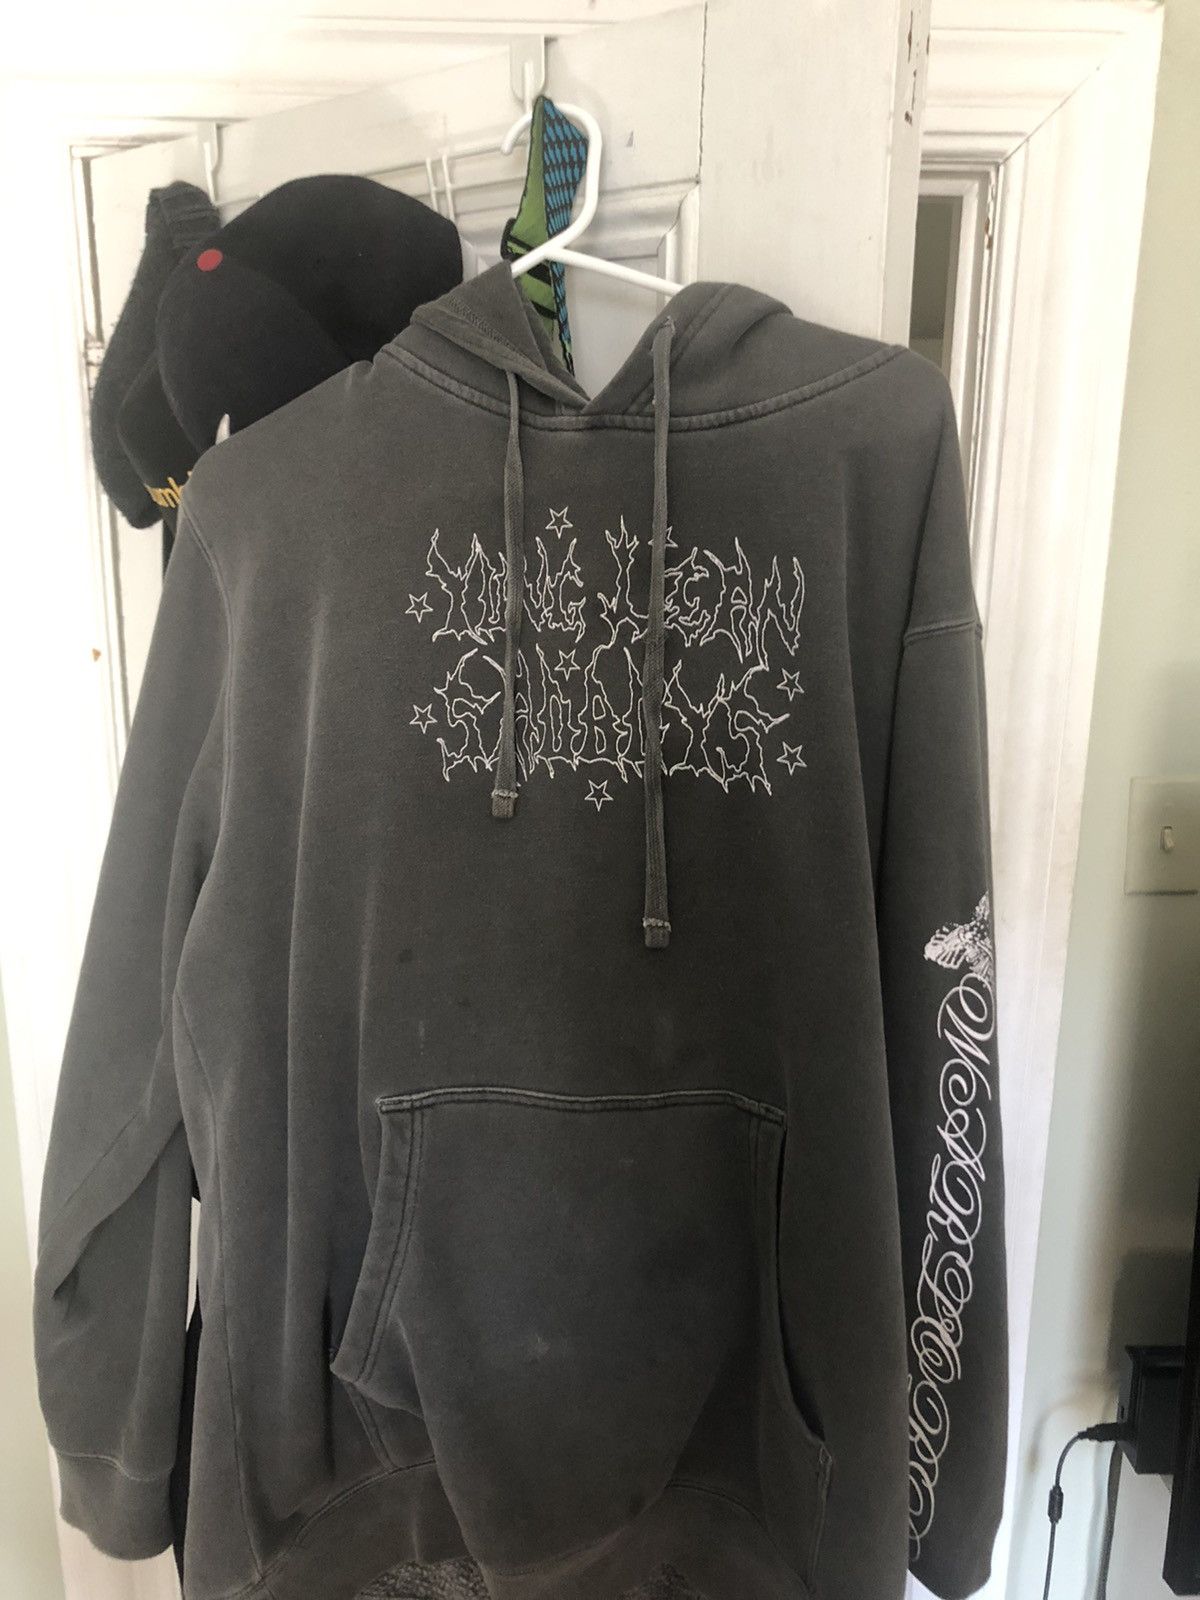 Sad Boys Yung Lean Warlord Hoodie (Anthracite) | Grailed